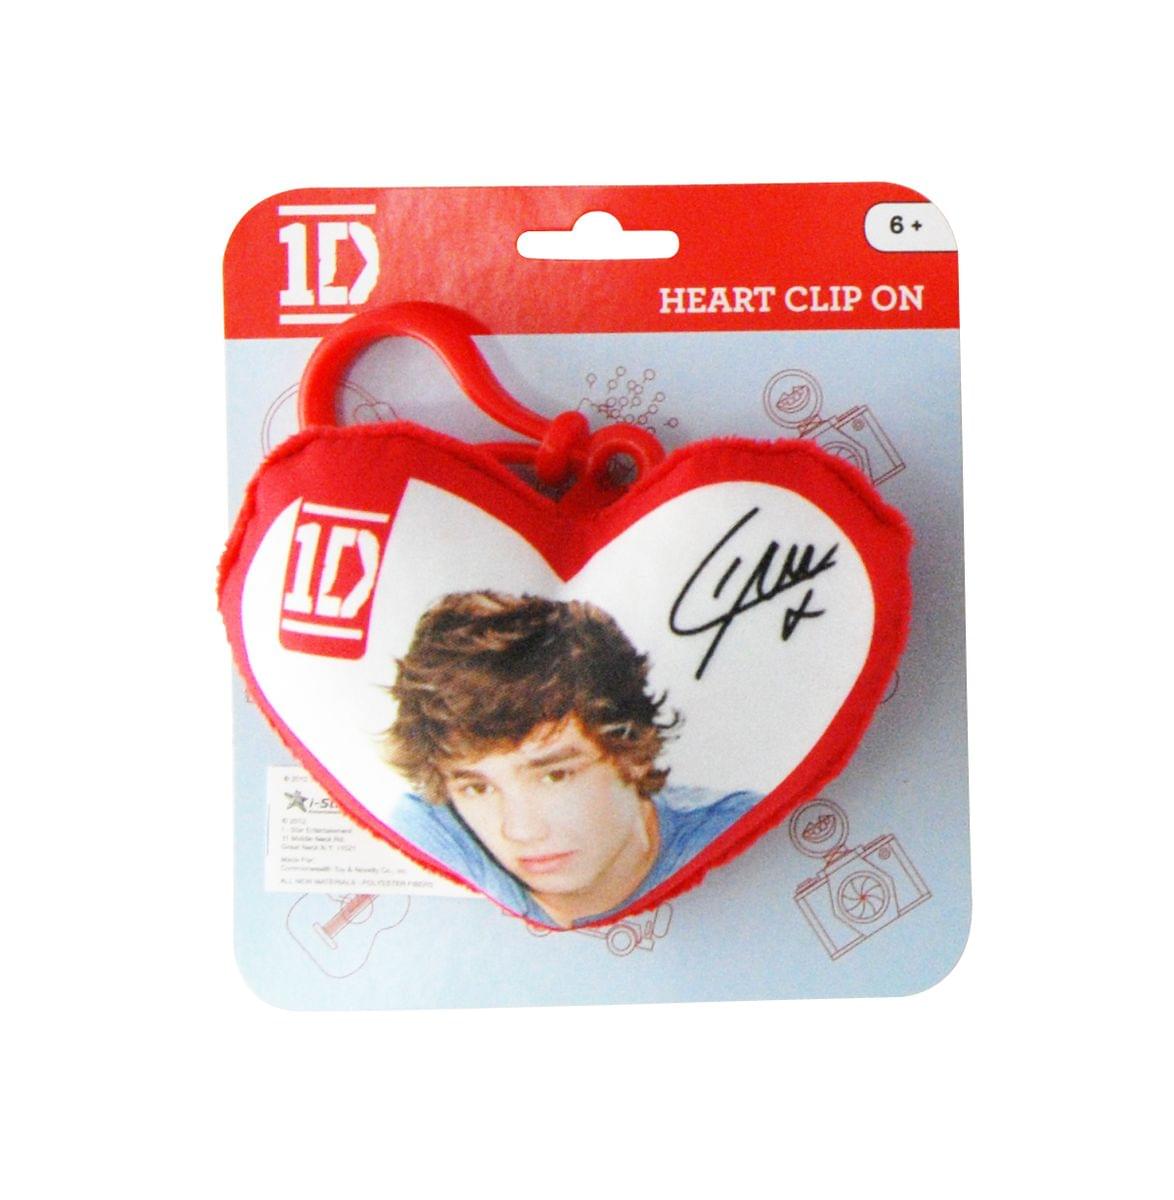 1D One Direction Plush Heart Clip-On: Liam